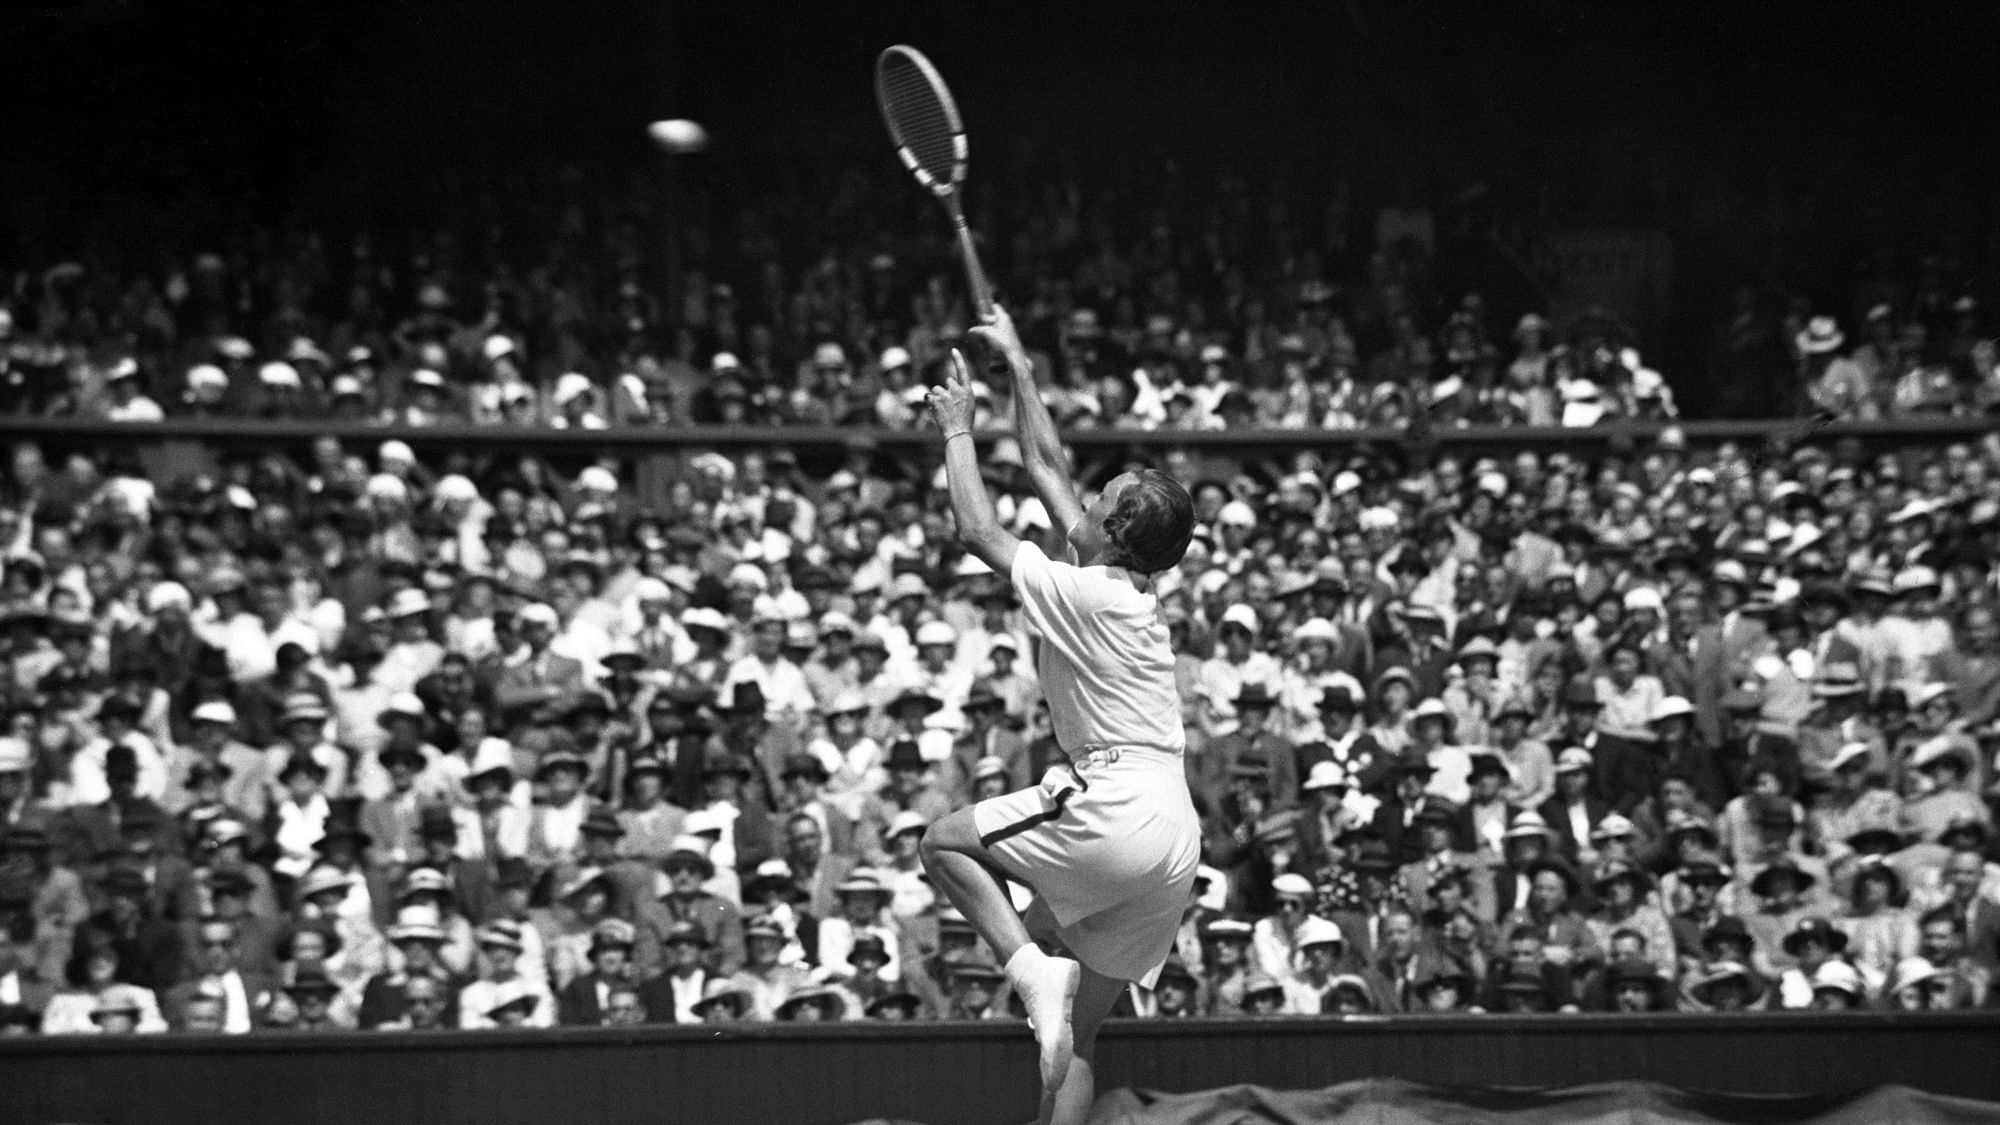 In this July 6, 1935 file photo, Helen Wills Moody hits a shot in the All England Lawn Tennis Championships final that she won. Wills Moody won eight Wimbledon titles and a total of 31 Grand Slams. (Photo: AP)<a></a>